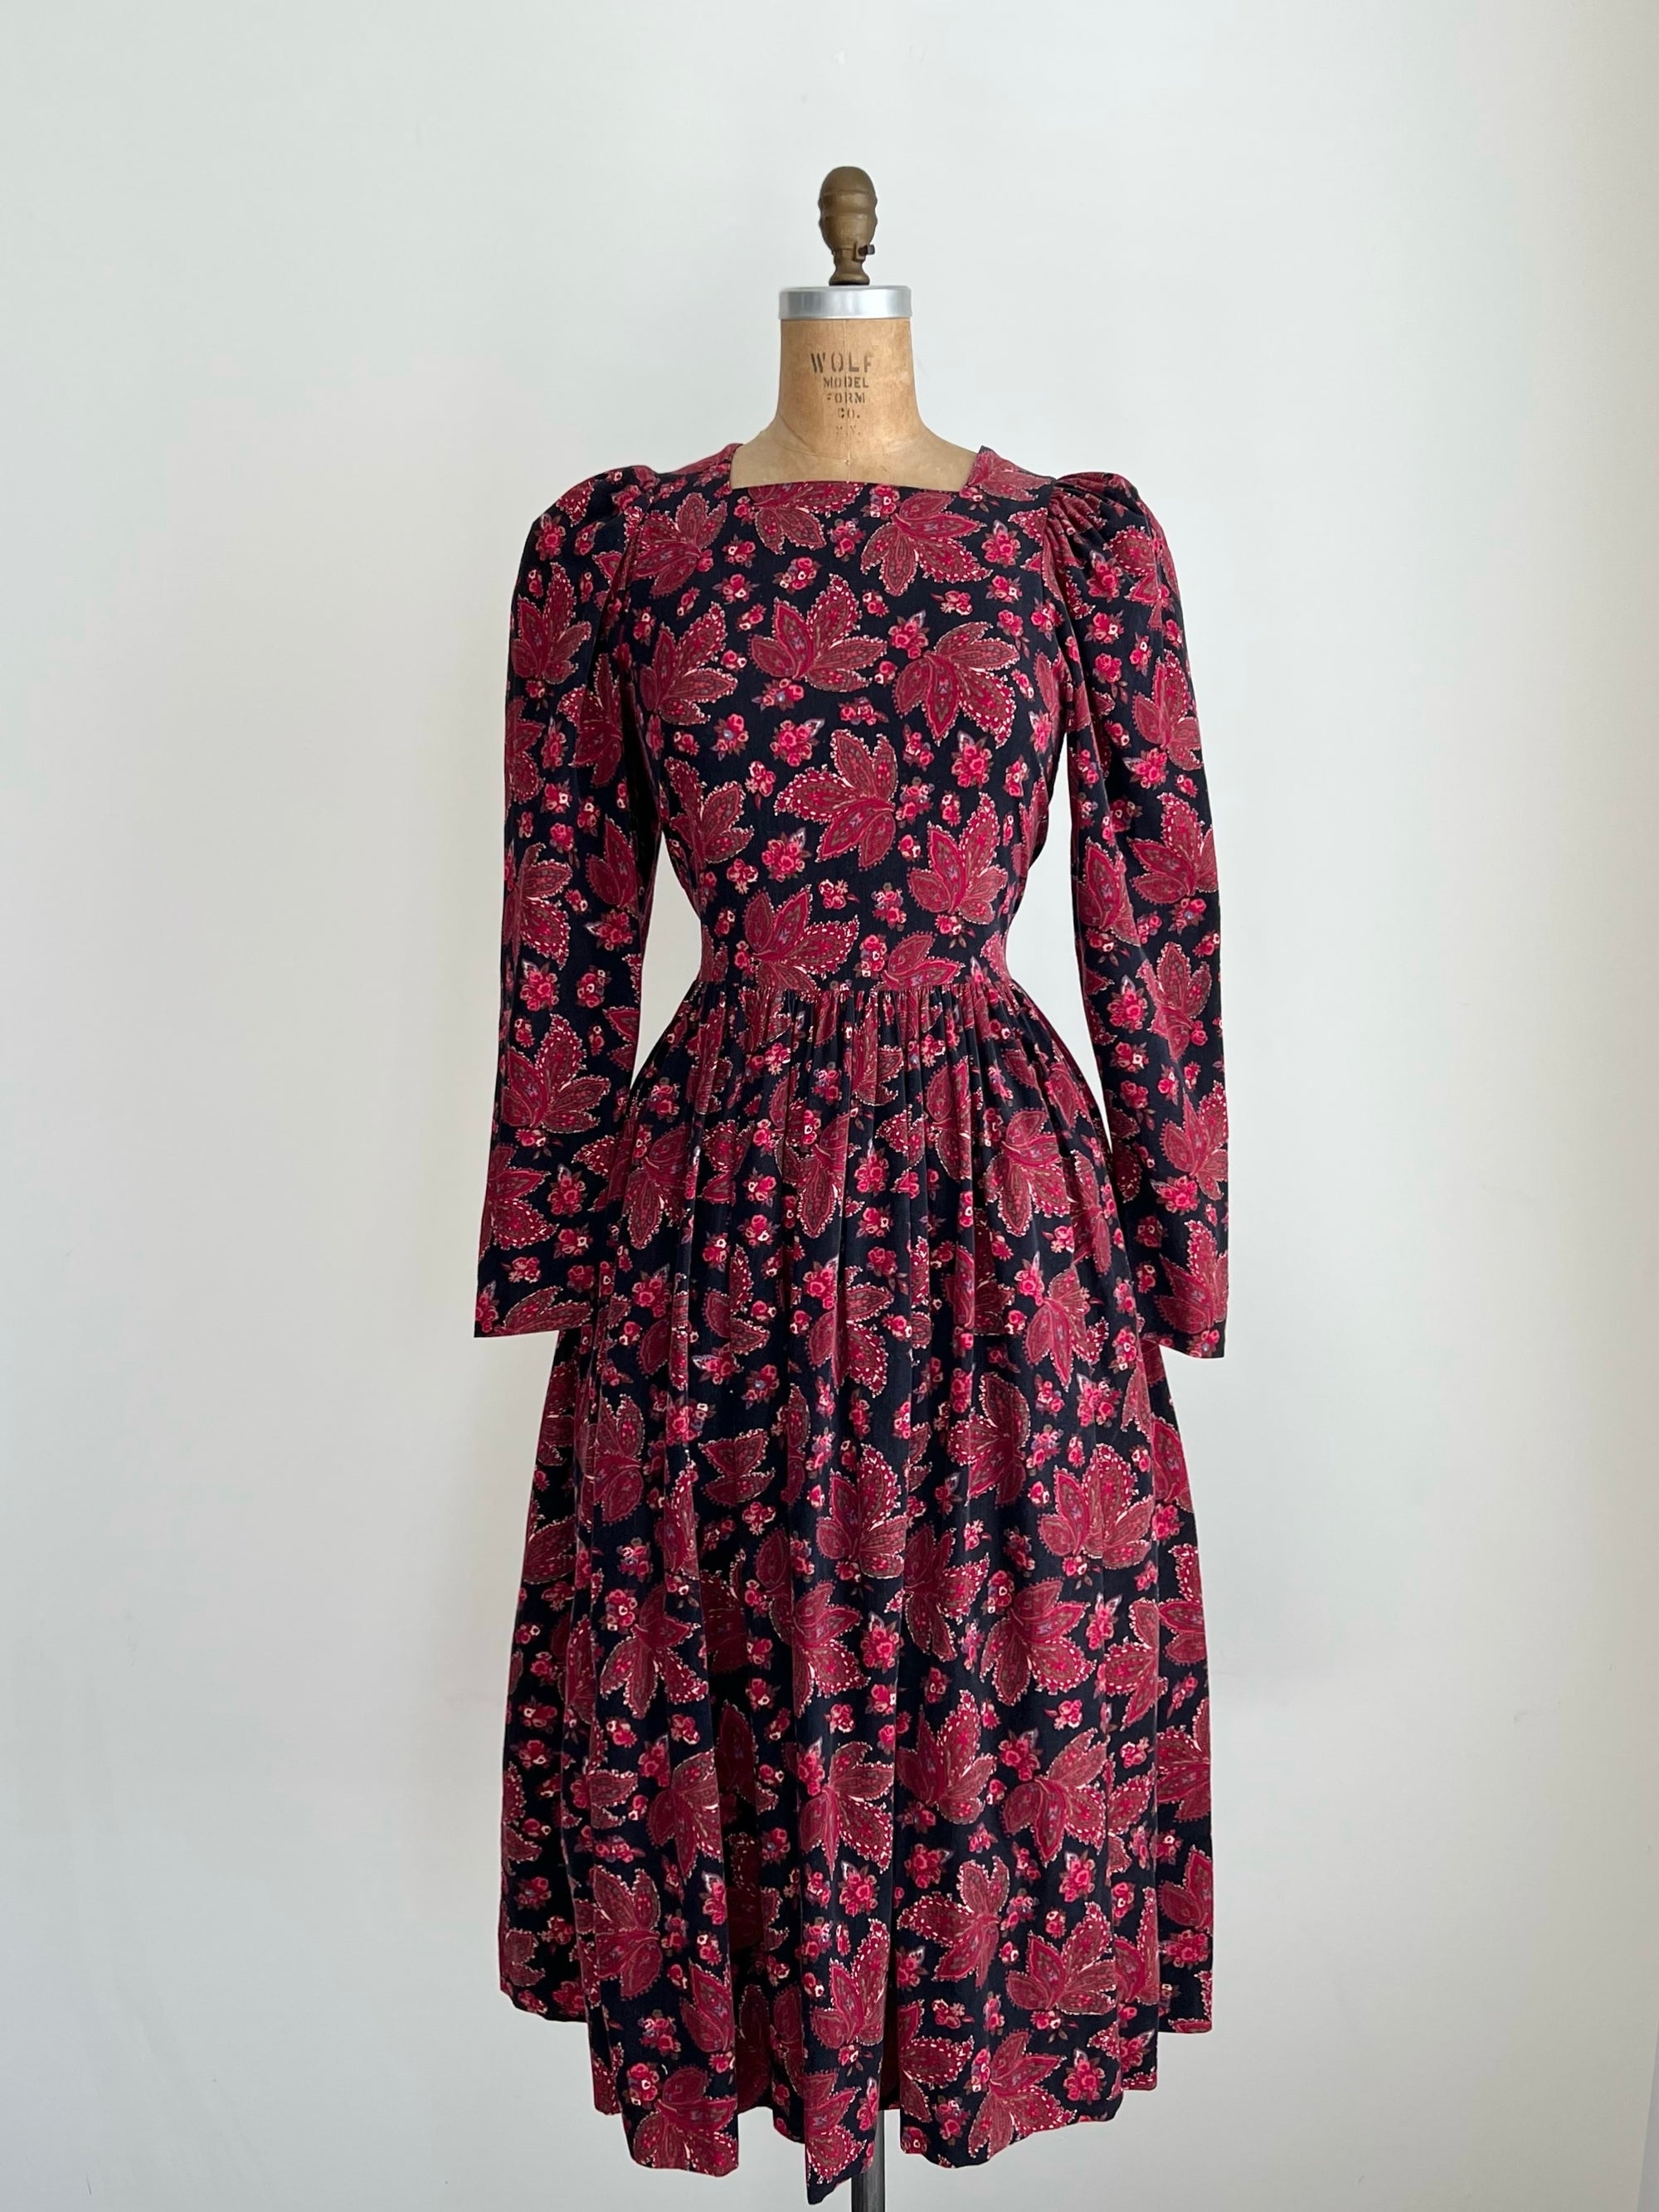 1980s Vintage Laura Ashley Cottagecore Prairie Corduroy Red Leaf Midi Dress with Puff Sleeves